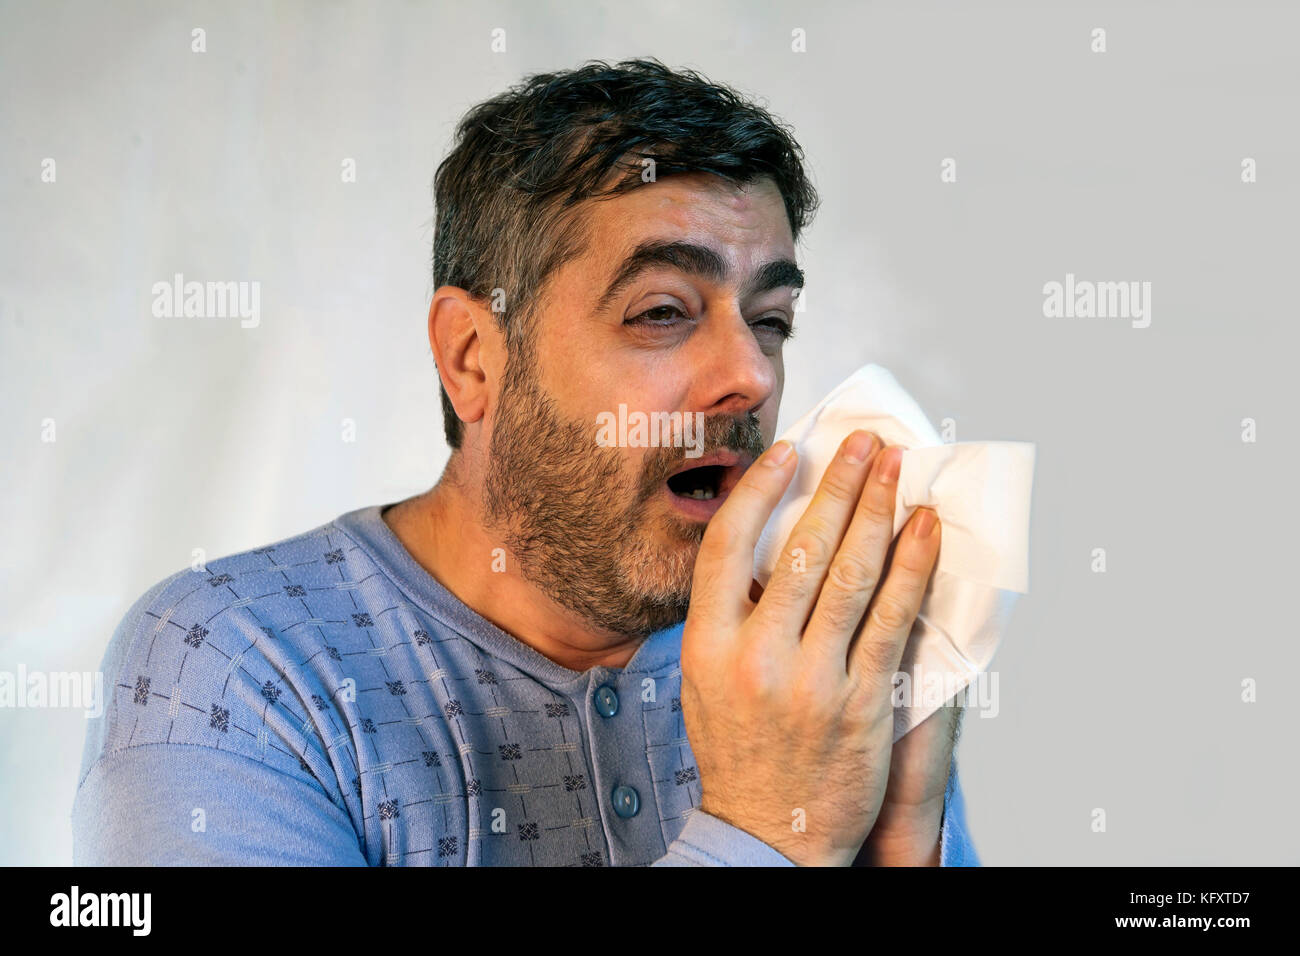 Man medium-sized age in pajamas sneezing with a strong cold Stock Photo